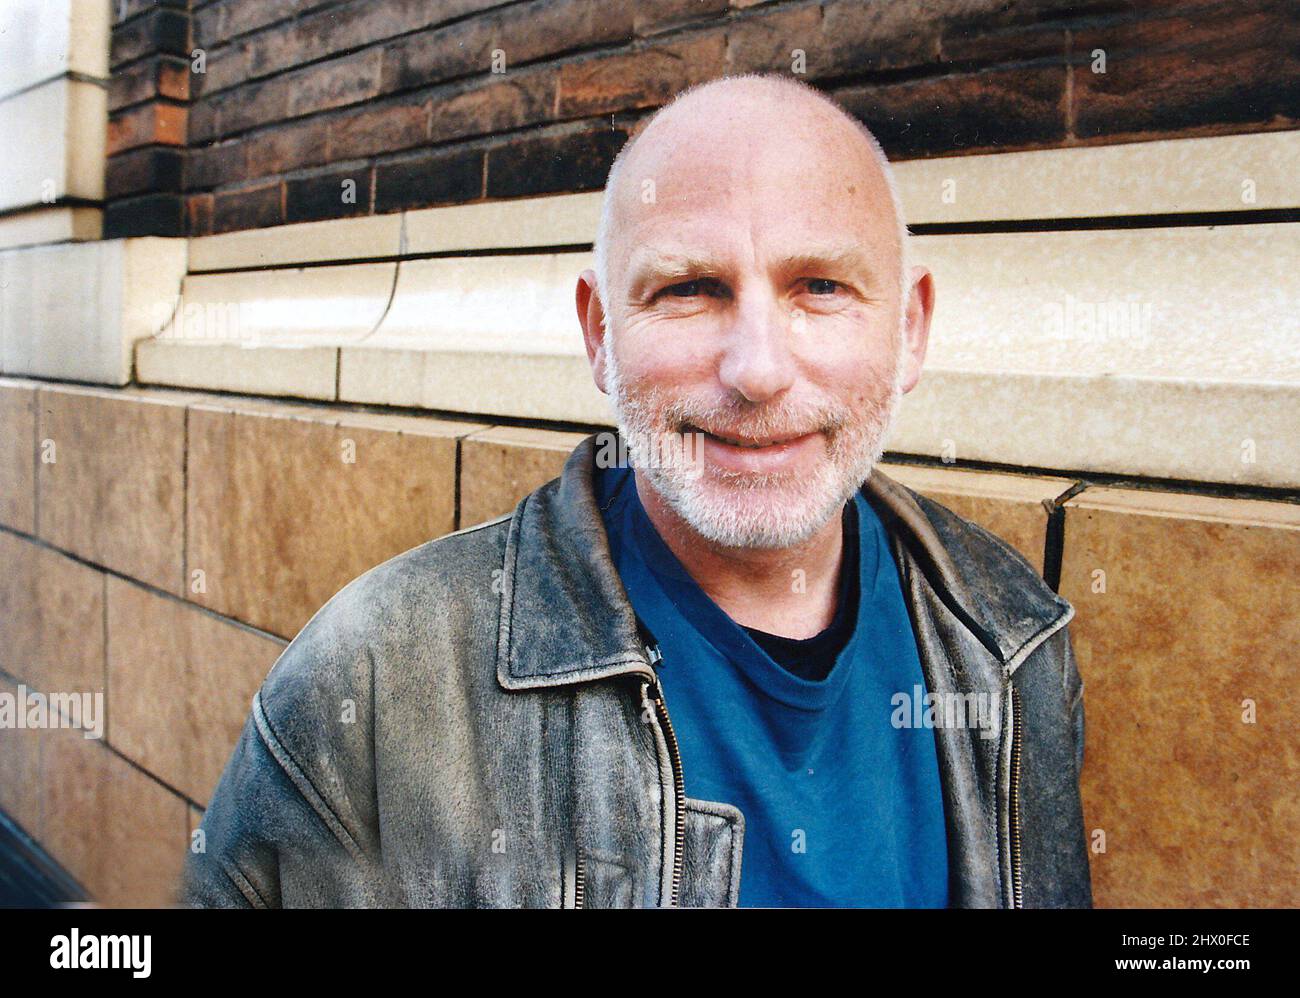 Gary Lewis is one of Scotland finest and best loved actors, appearing in films like; Orphans, Billy Elliot, Gangs of New York, Shallow Grave. Many television dramas as well. Alan Wylie/ALAMY.© Stock Photo